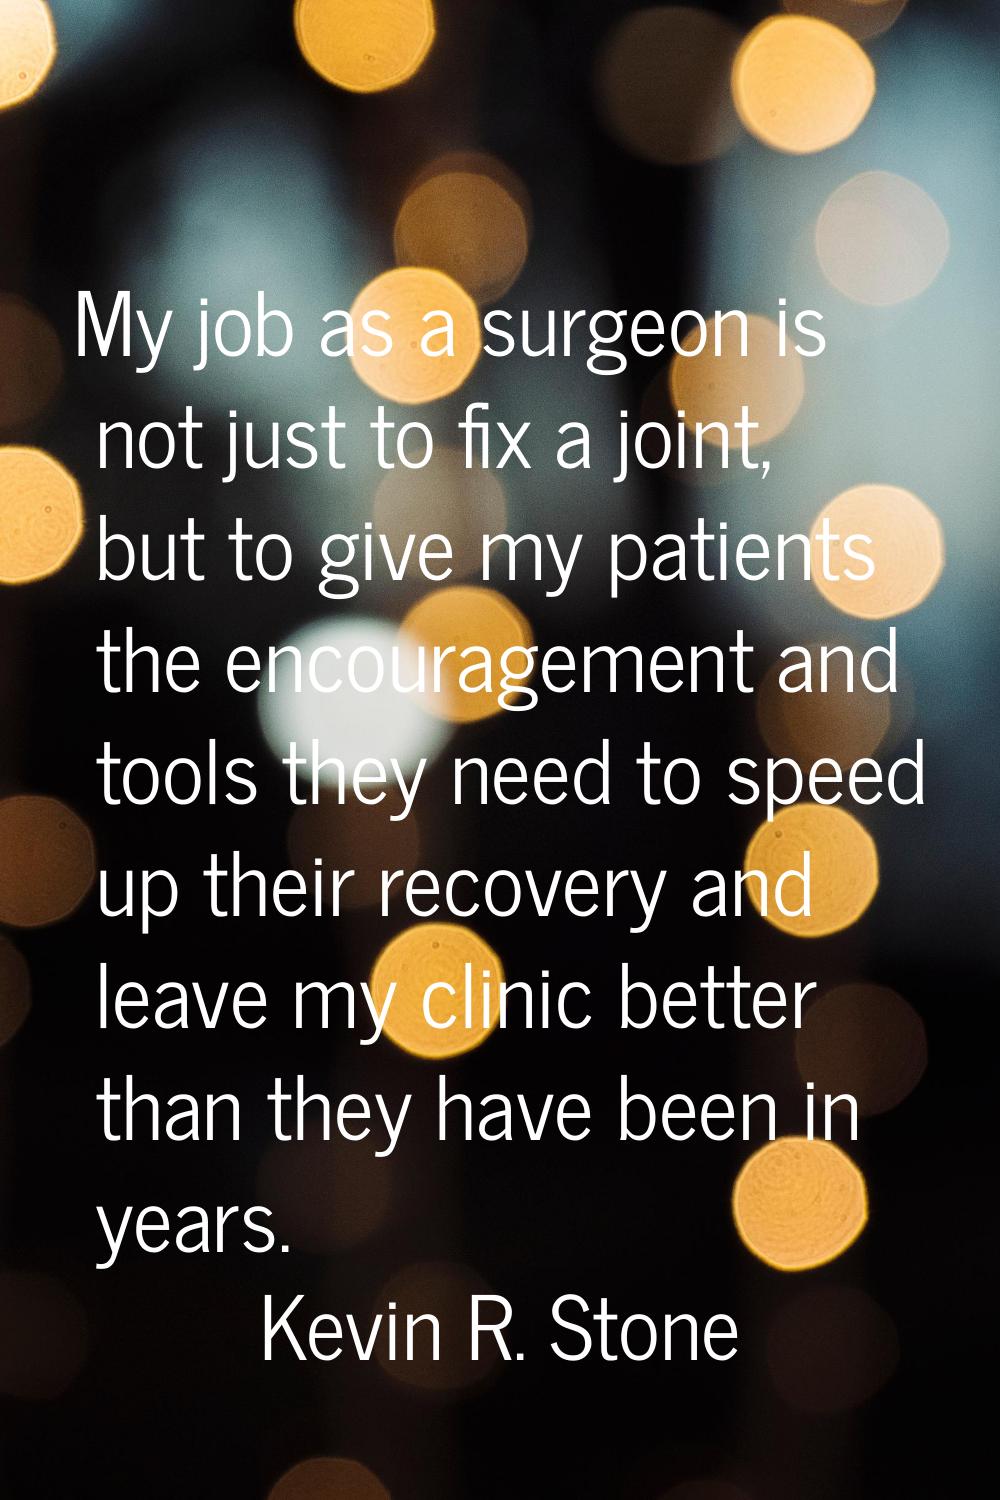 My job as a surgeon is not just to fix a joint, but to give my patients the encouragement and tools